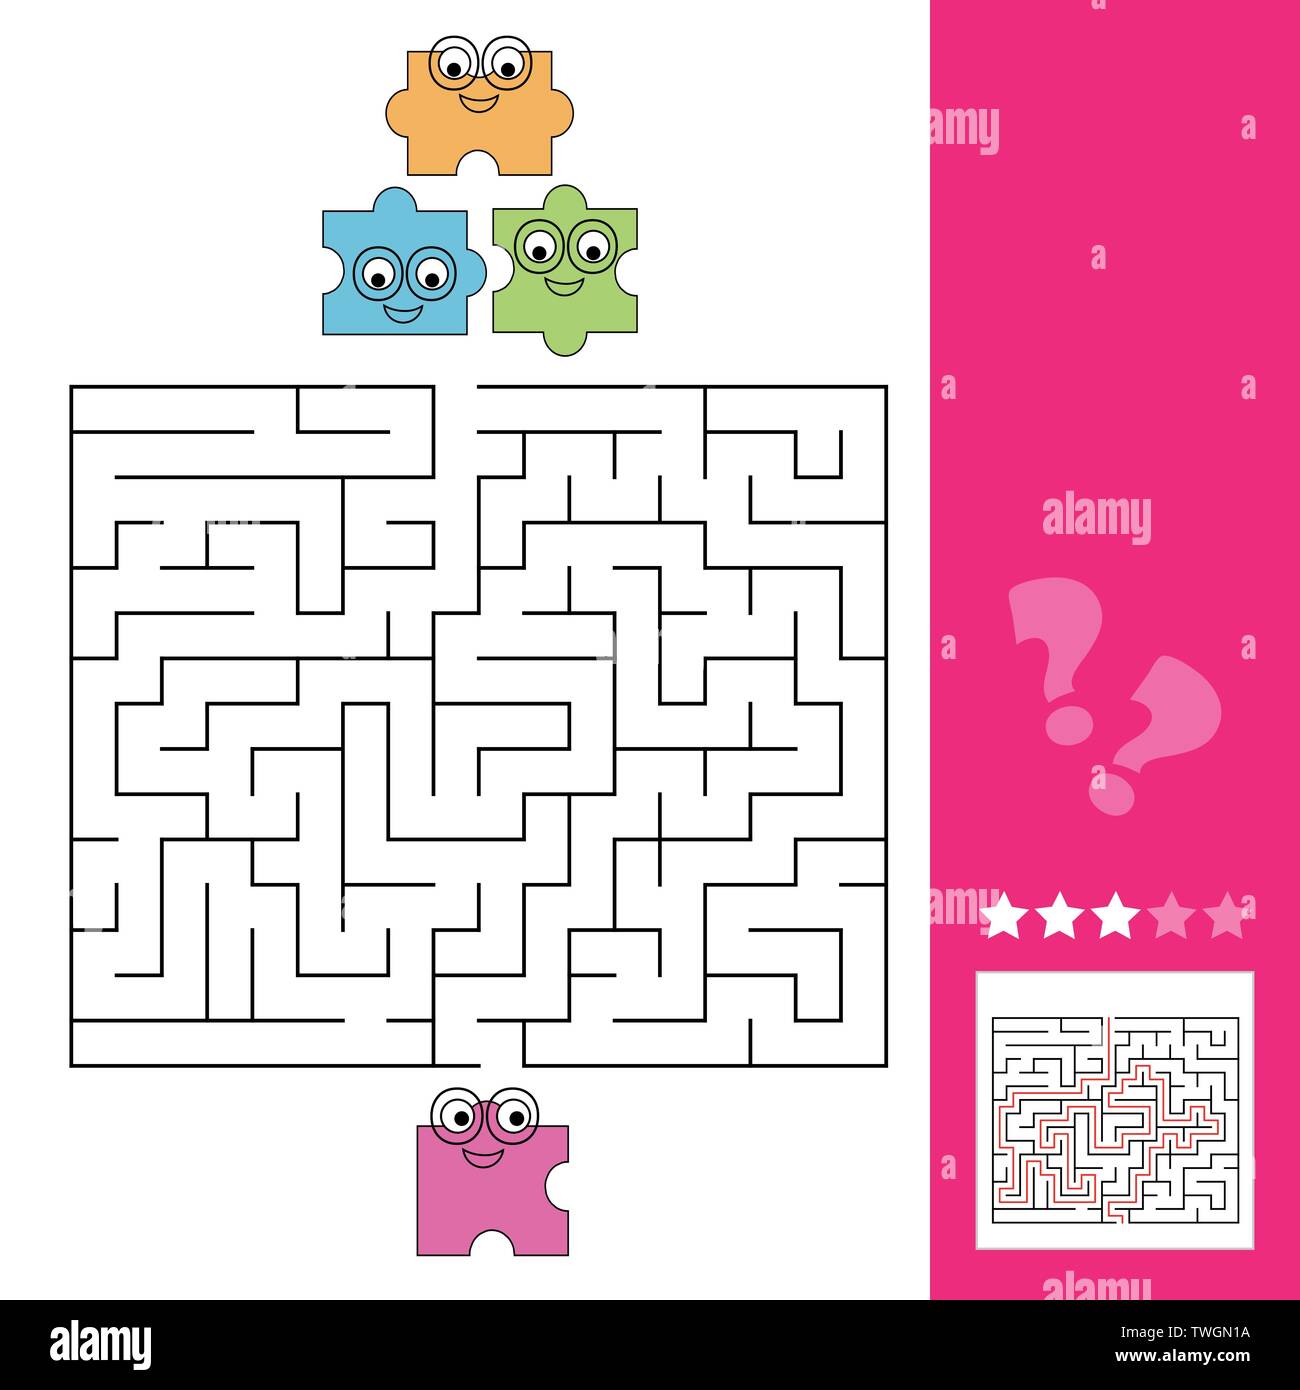 Help the puzzle piece to find the way to the puzzle, maze game for kids, answer included Stock Vector